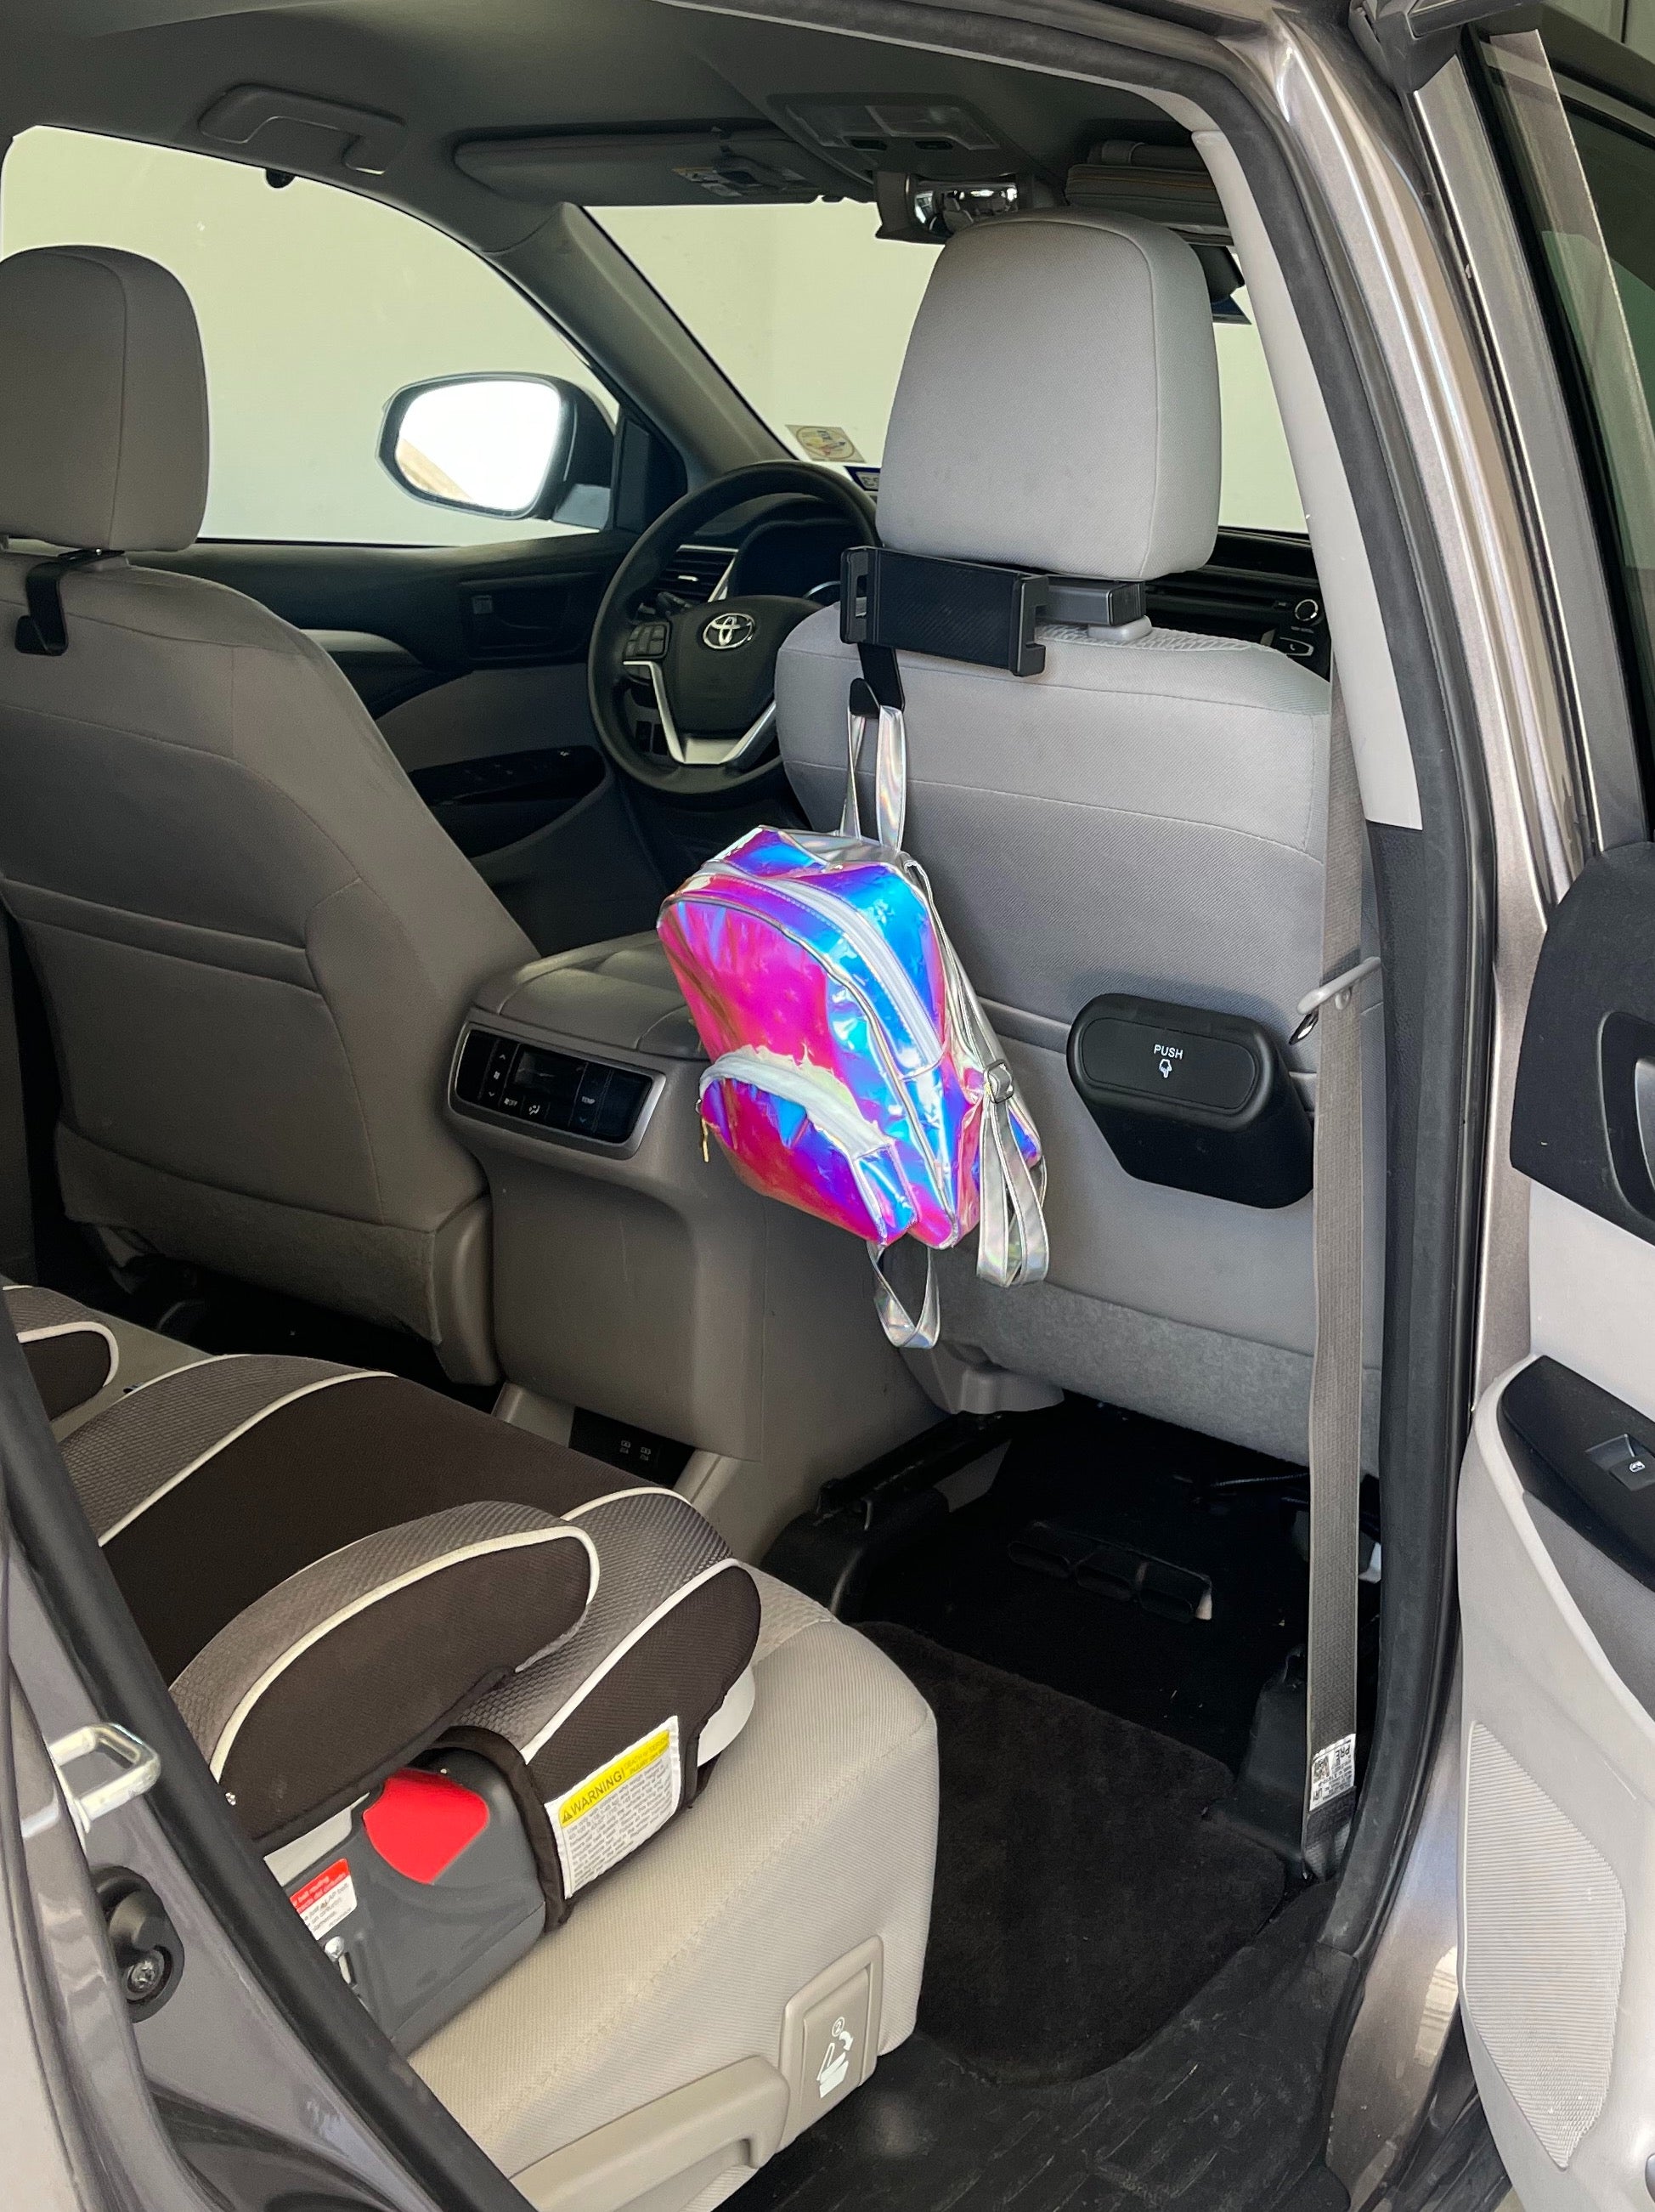 Organize Your Car with These Backseat Organizers